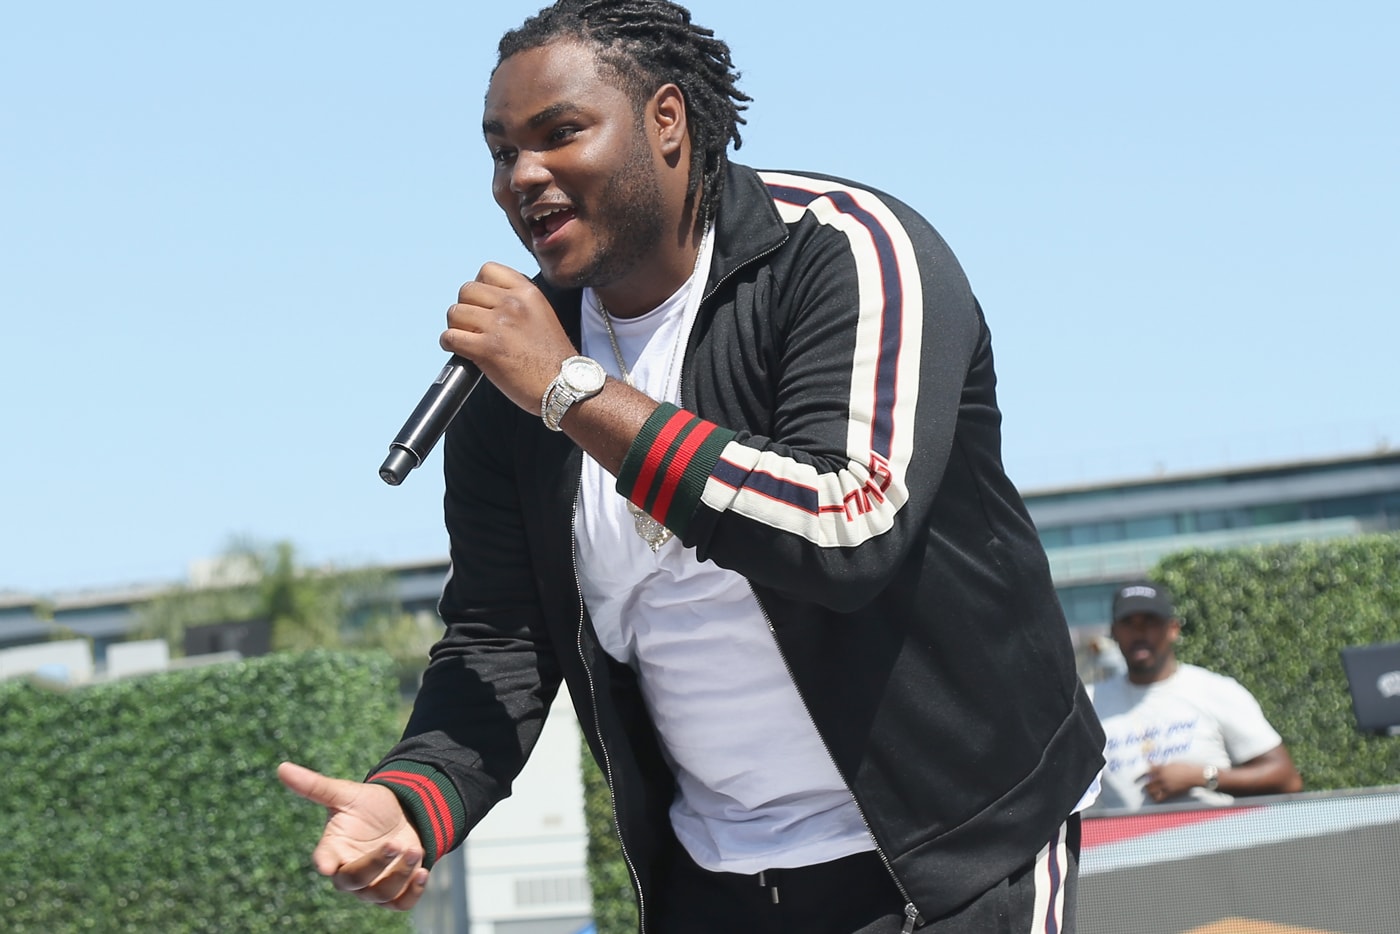 tee grizzley offset pray for the drip single stream 2018 new still my moment october song music track collab collaboration mixtape project